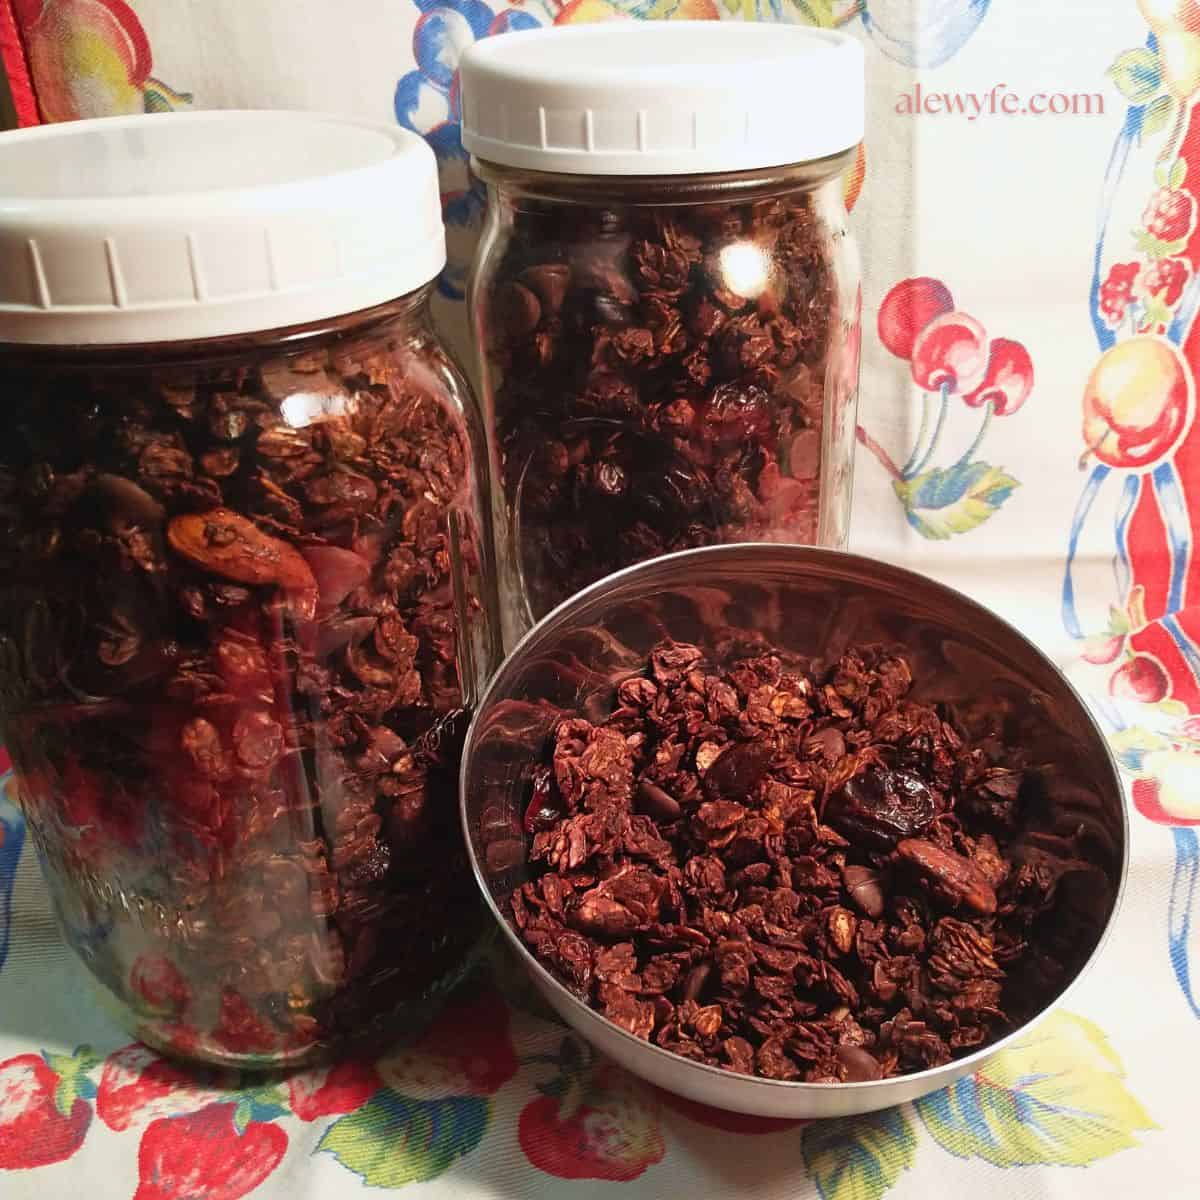 two quart jars and a small bowl of chocolate cherry almond granola, on a vintage fruit printed tea towel.